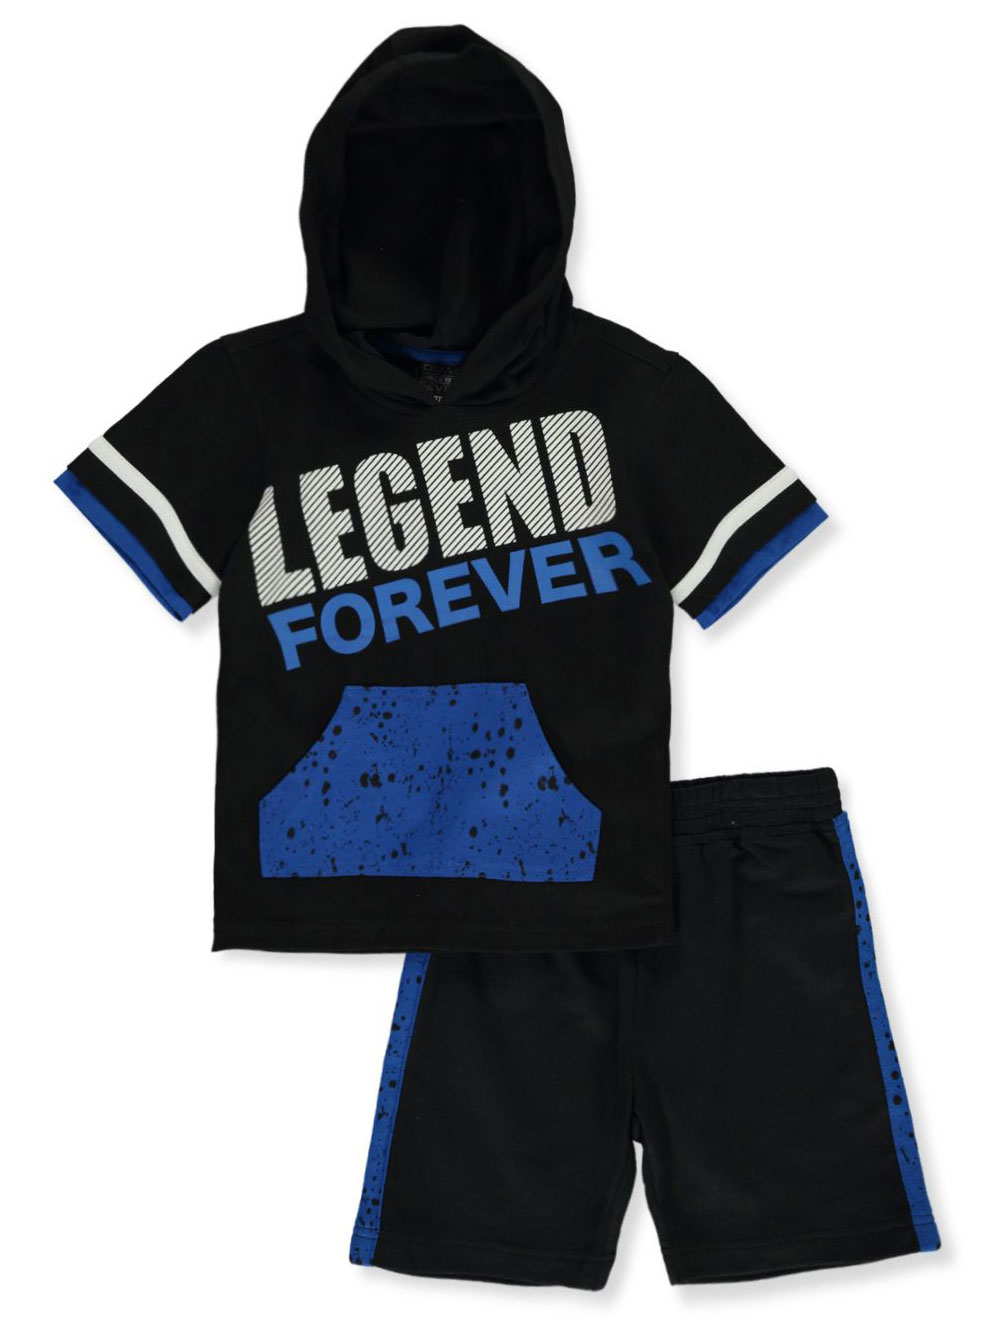 Size 16-18 Sets for Boys